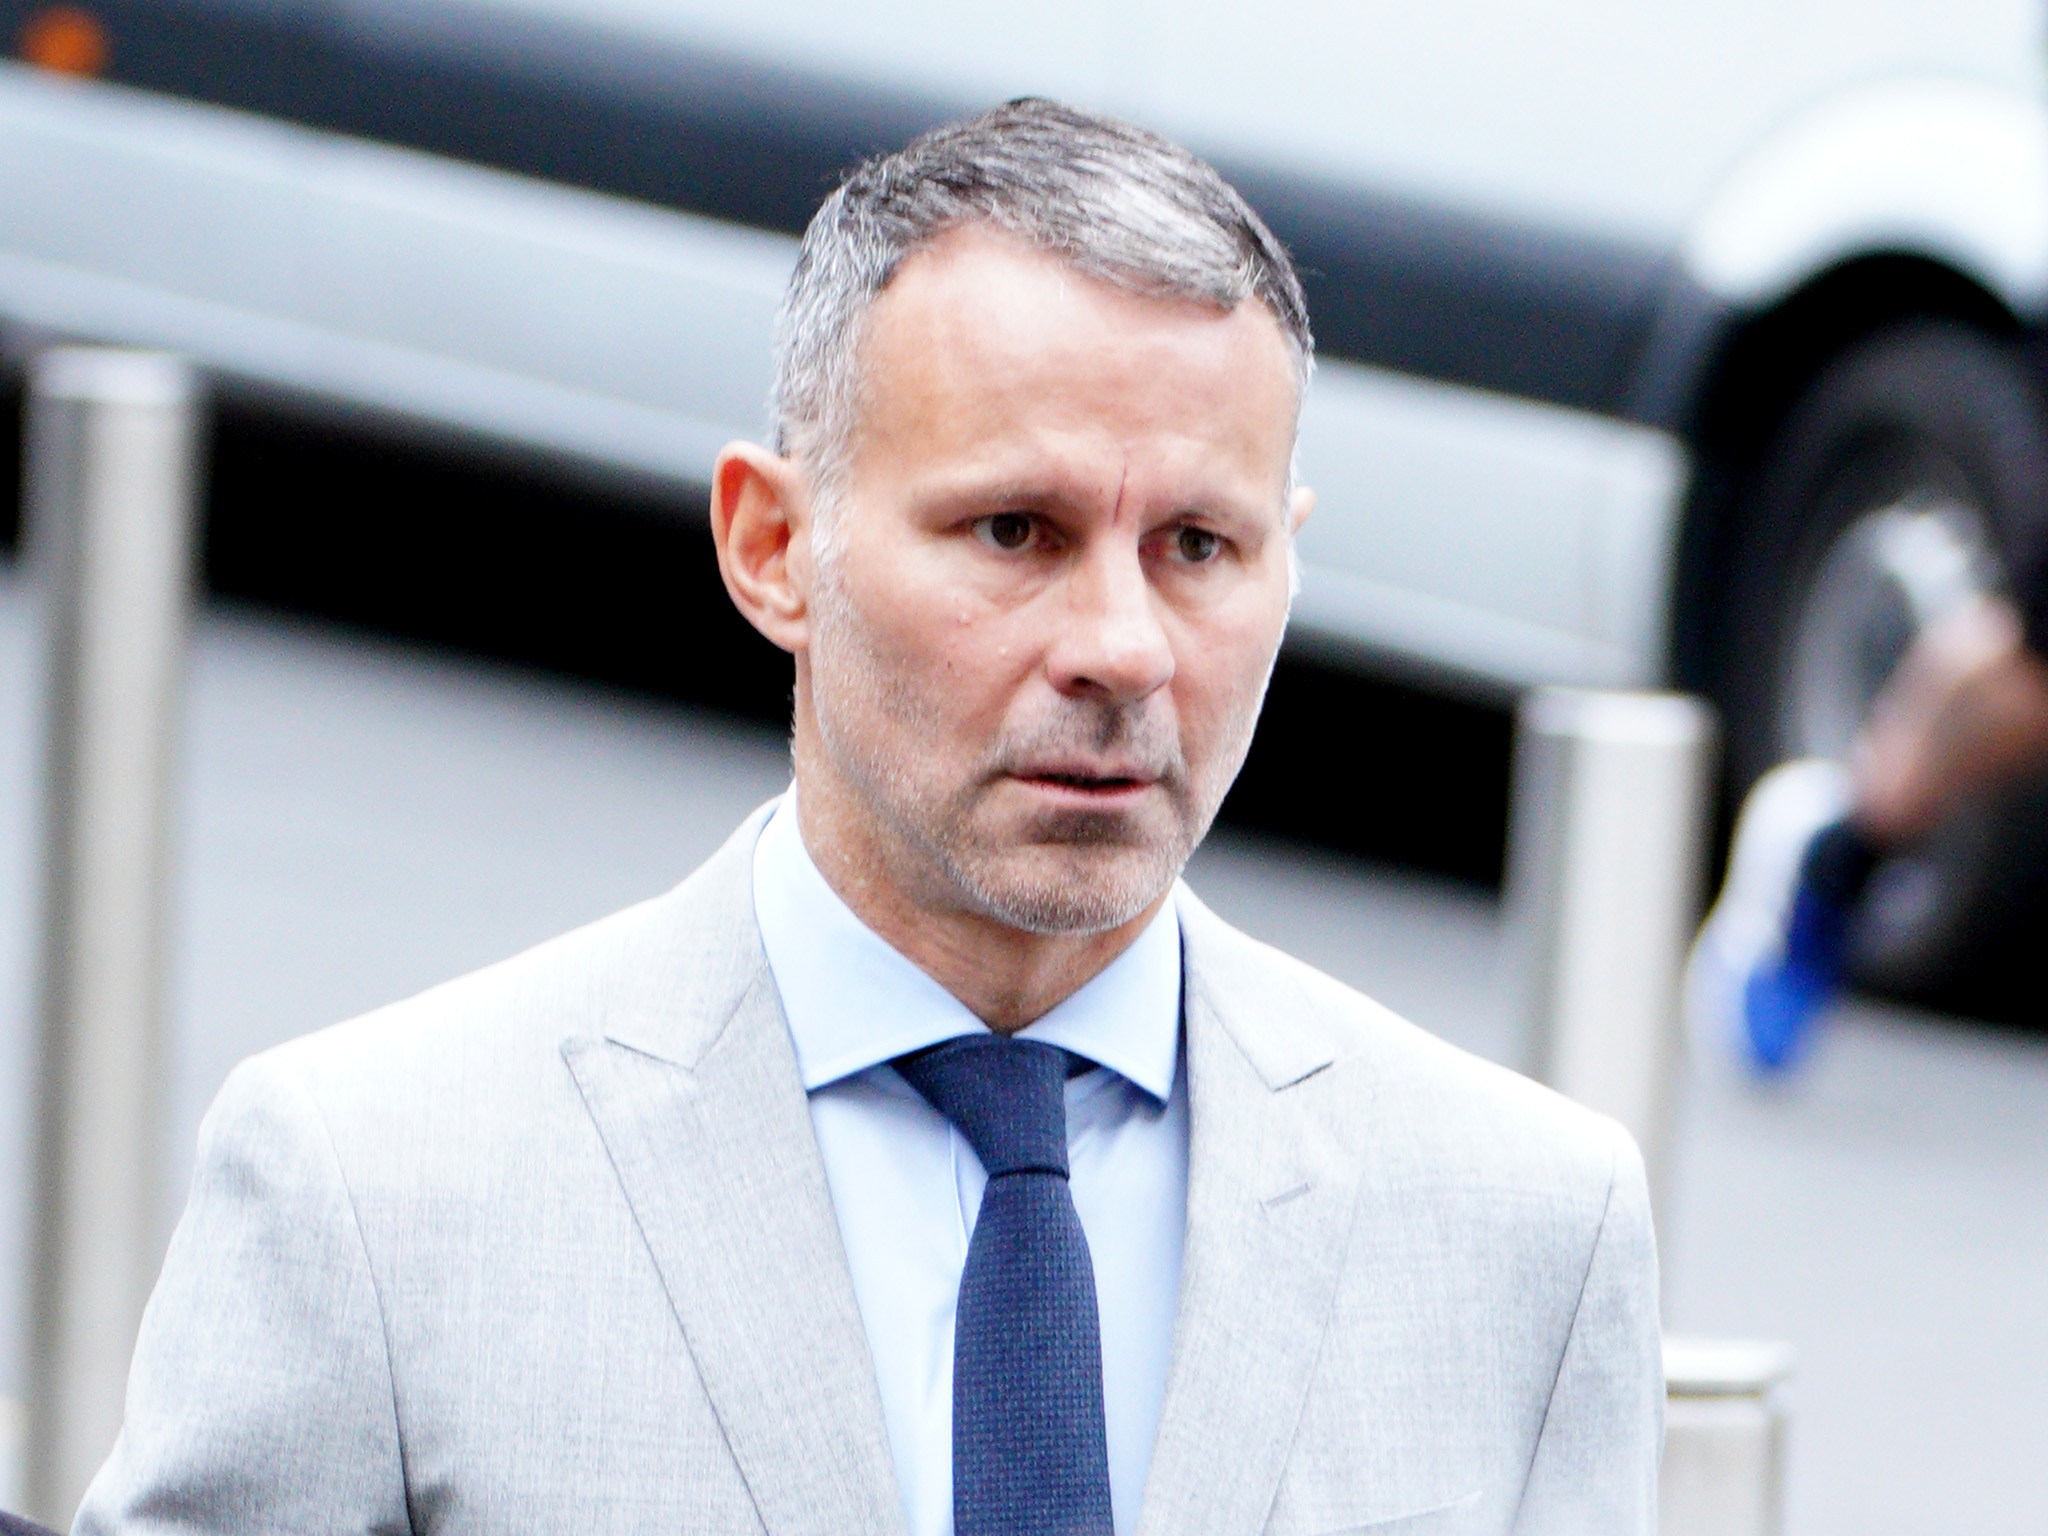 Giggs enjoyed rough sex life with ex who accuses him of assault, jury told FourFourTwo pic